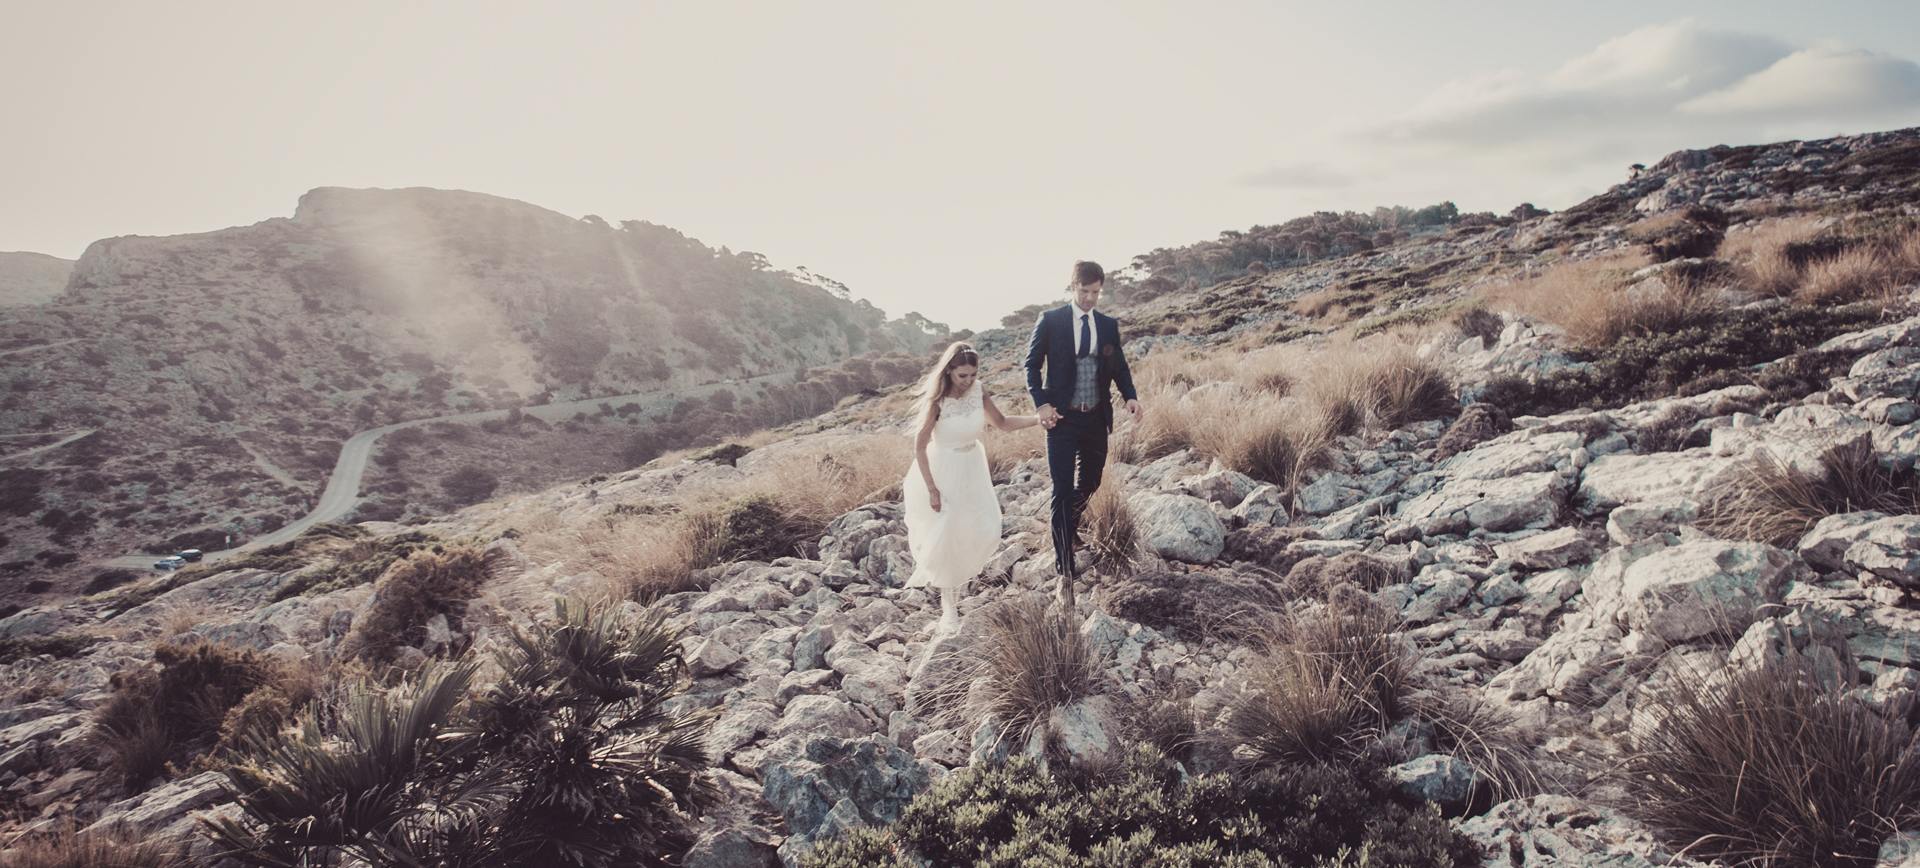 Mallorca beach elopement in Formentor - Bride and Groom on wedding day